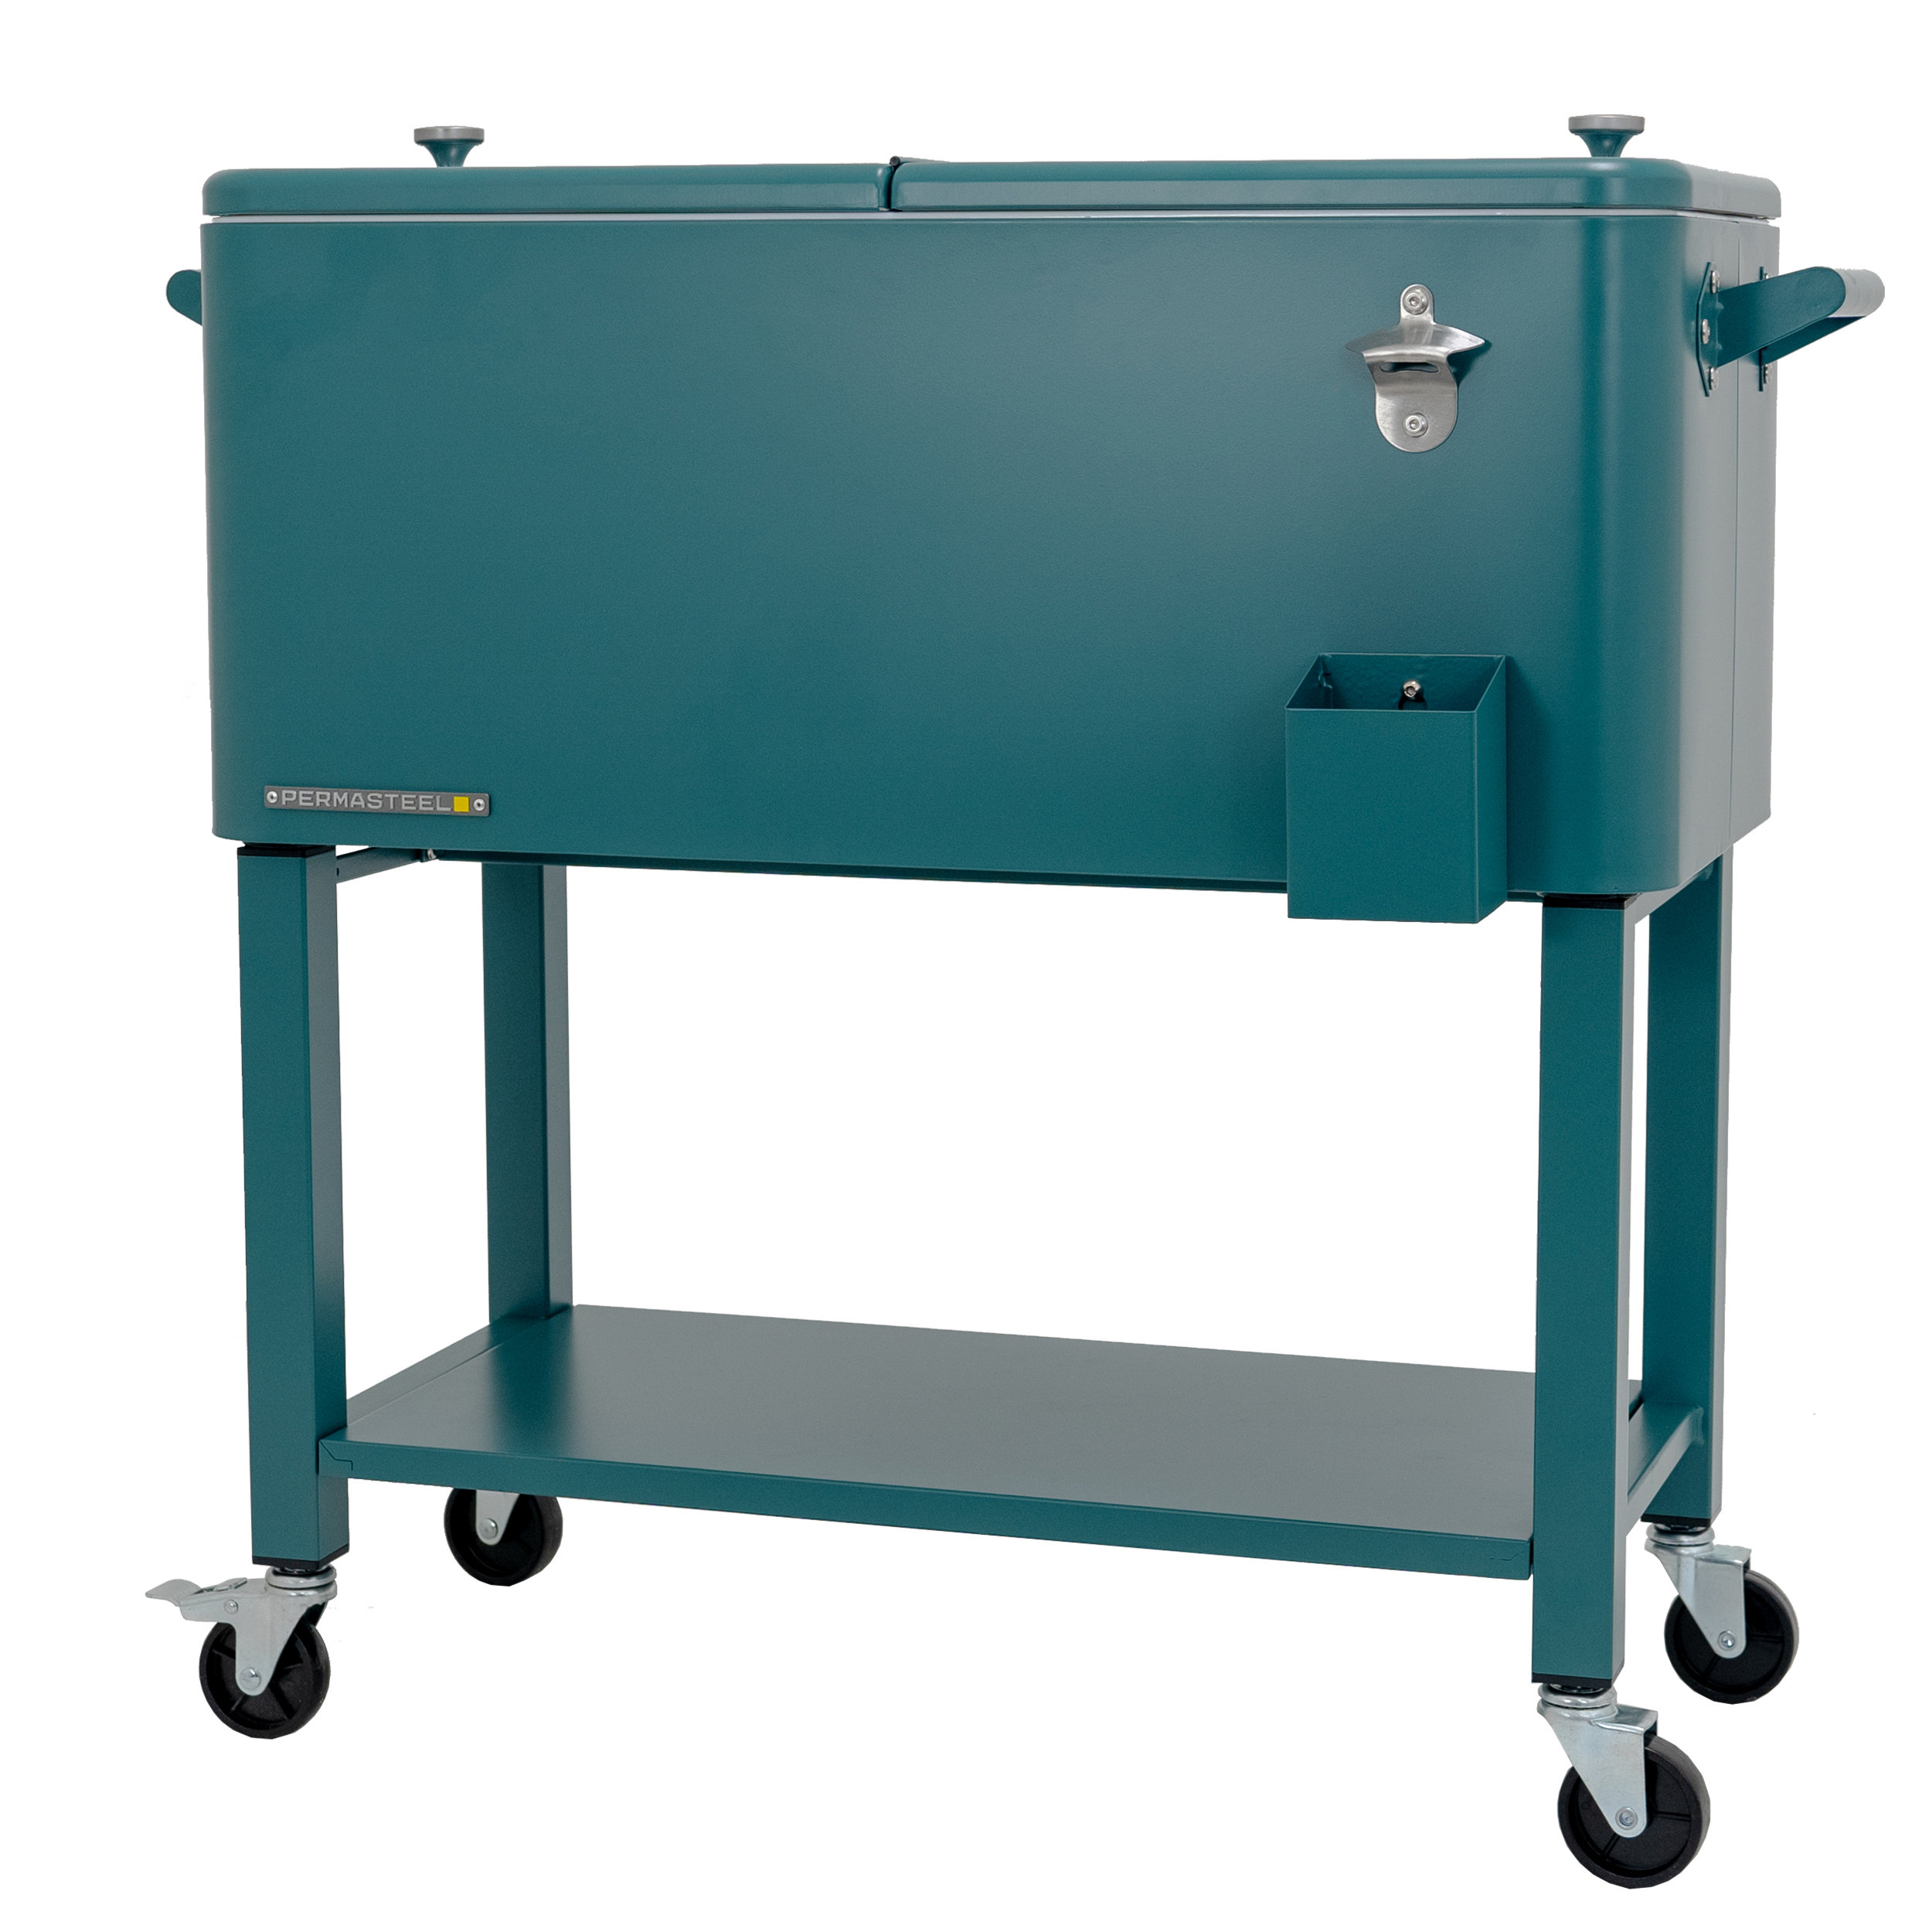 Permasteel 80-Qt Outdoor Patio Cooler with Removable Basin Color: Teal